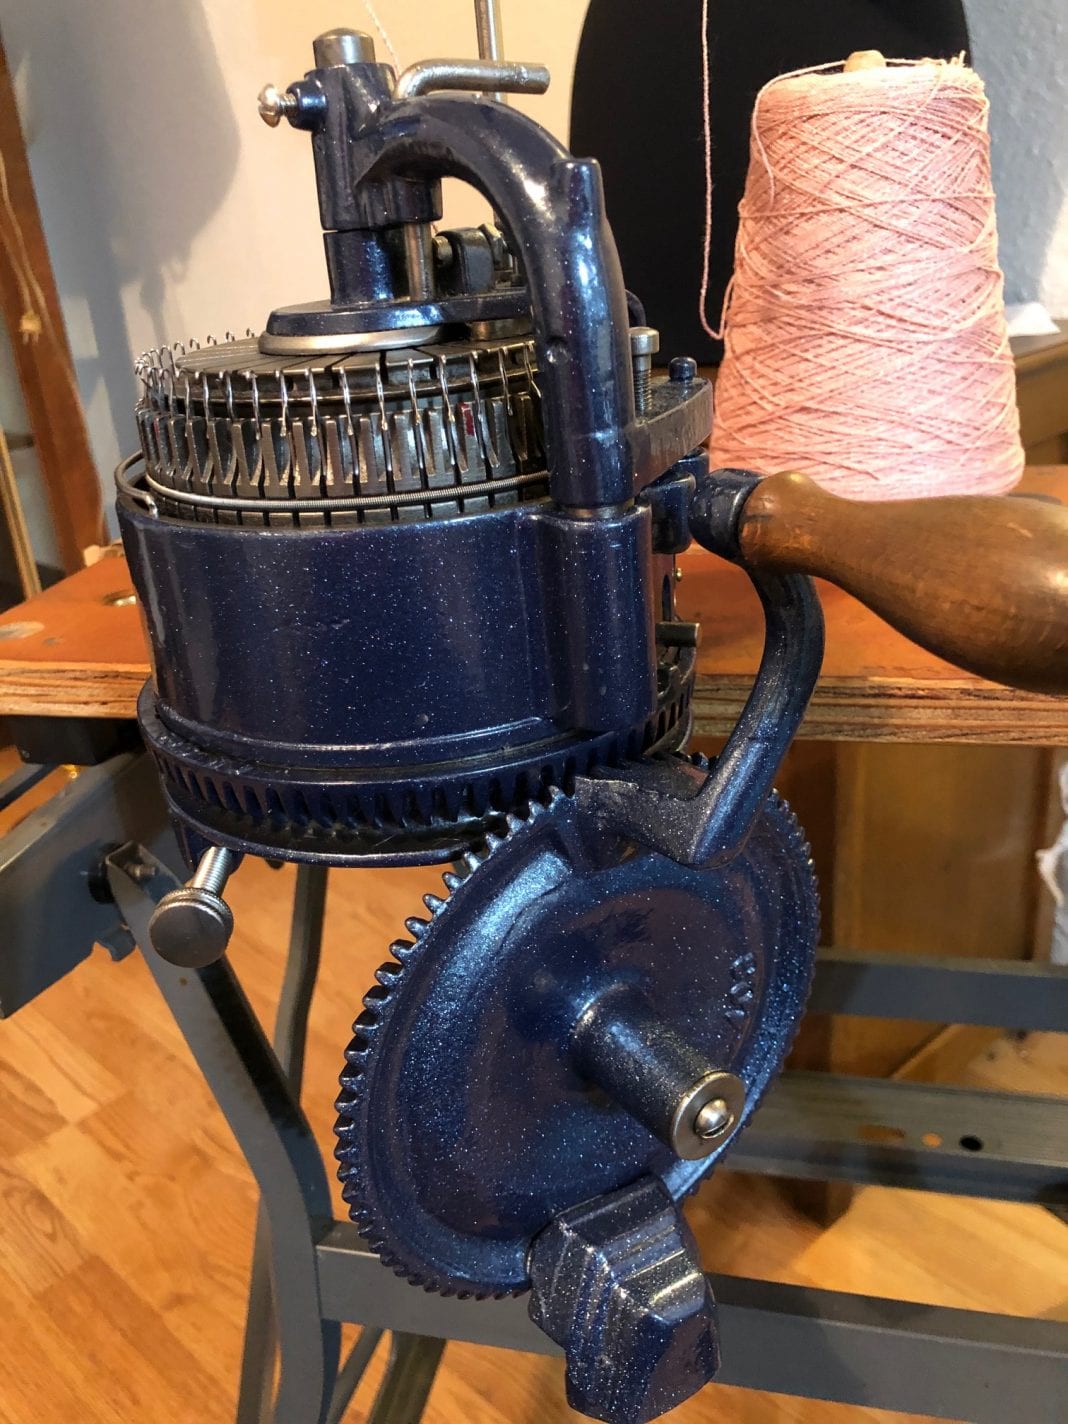 The Sock Peddlers of Lakewood Peddling Yarns, Knitting, and Antique